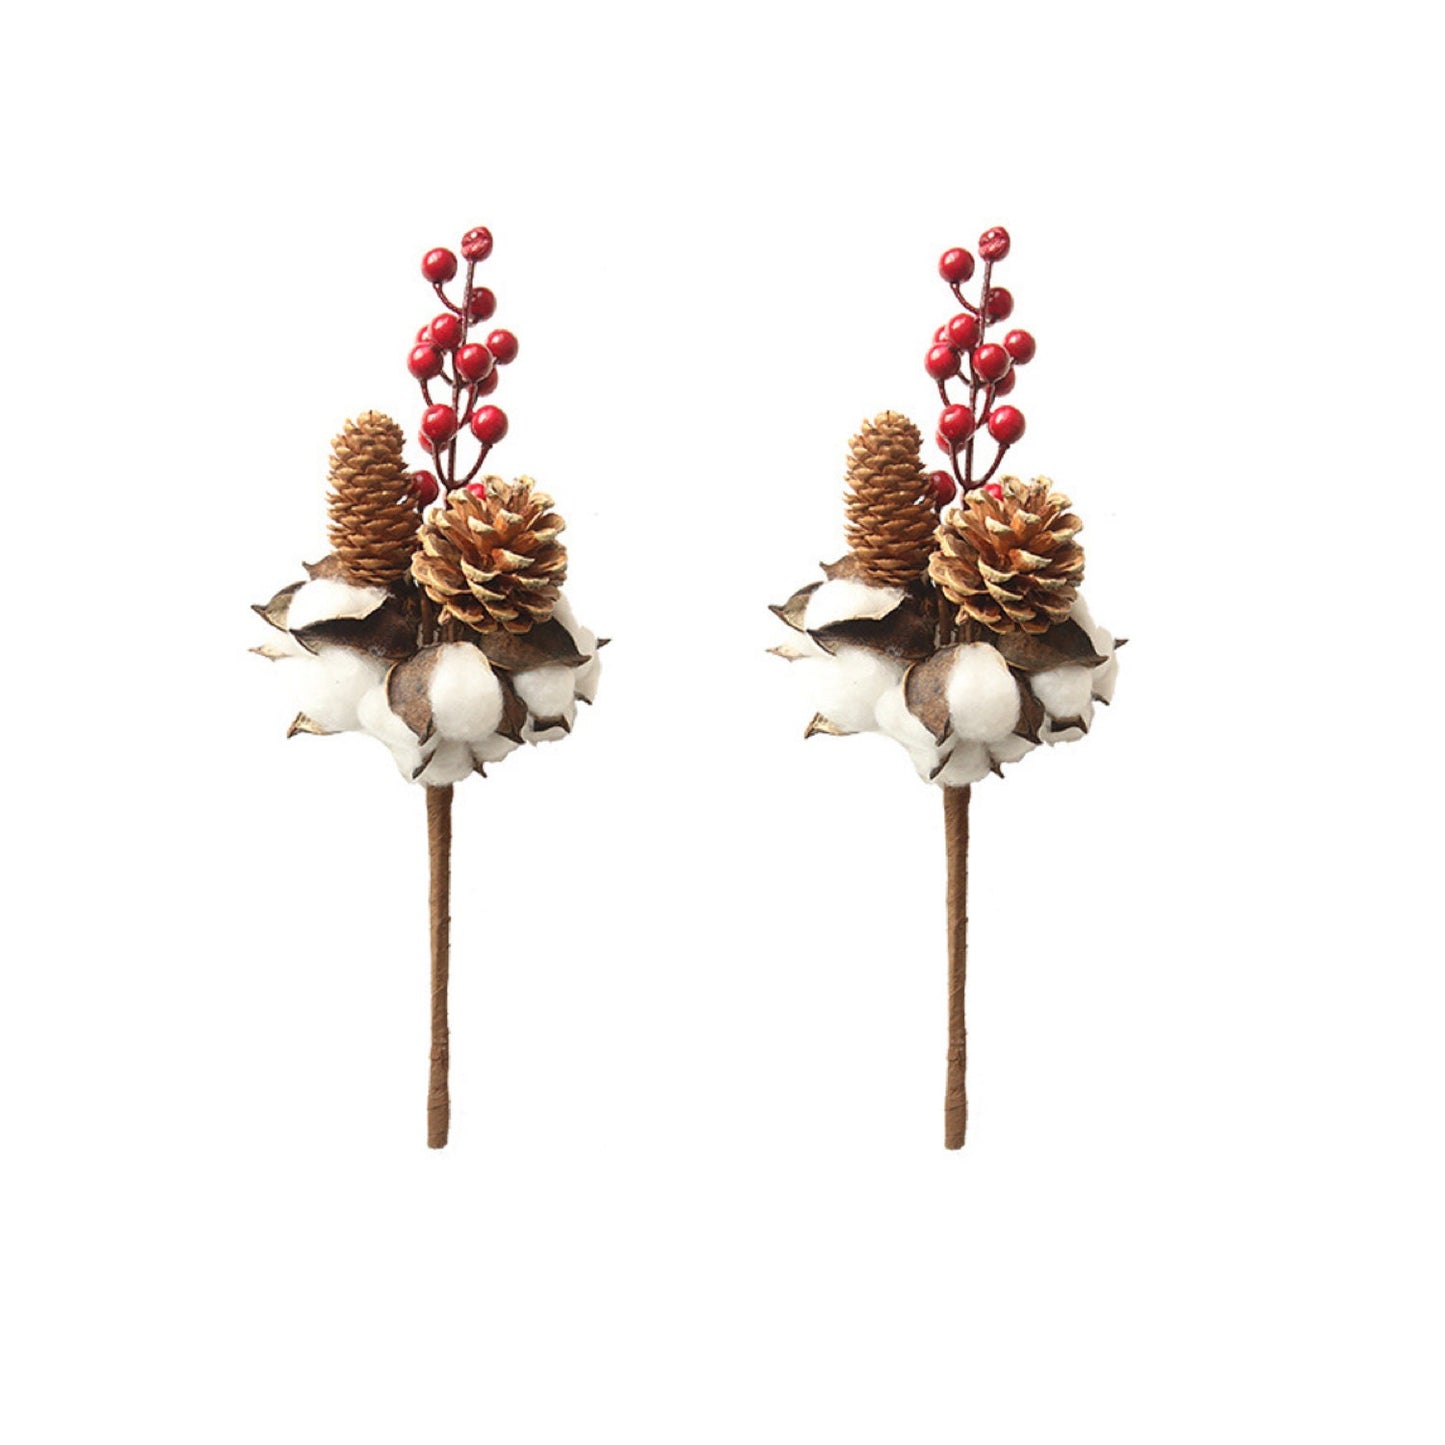 Rustic Cotton Stems with 5 Cotton Bolls per Stem Artificial Christmas Holiday Berries (Set of 2)